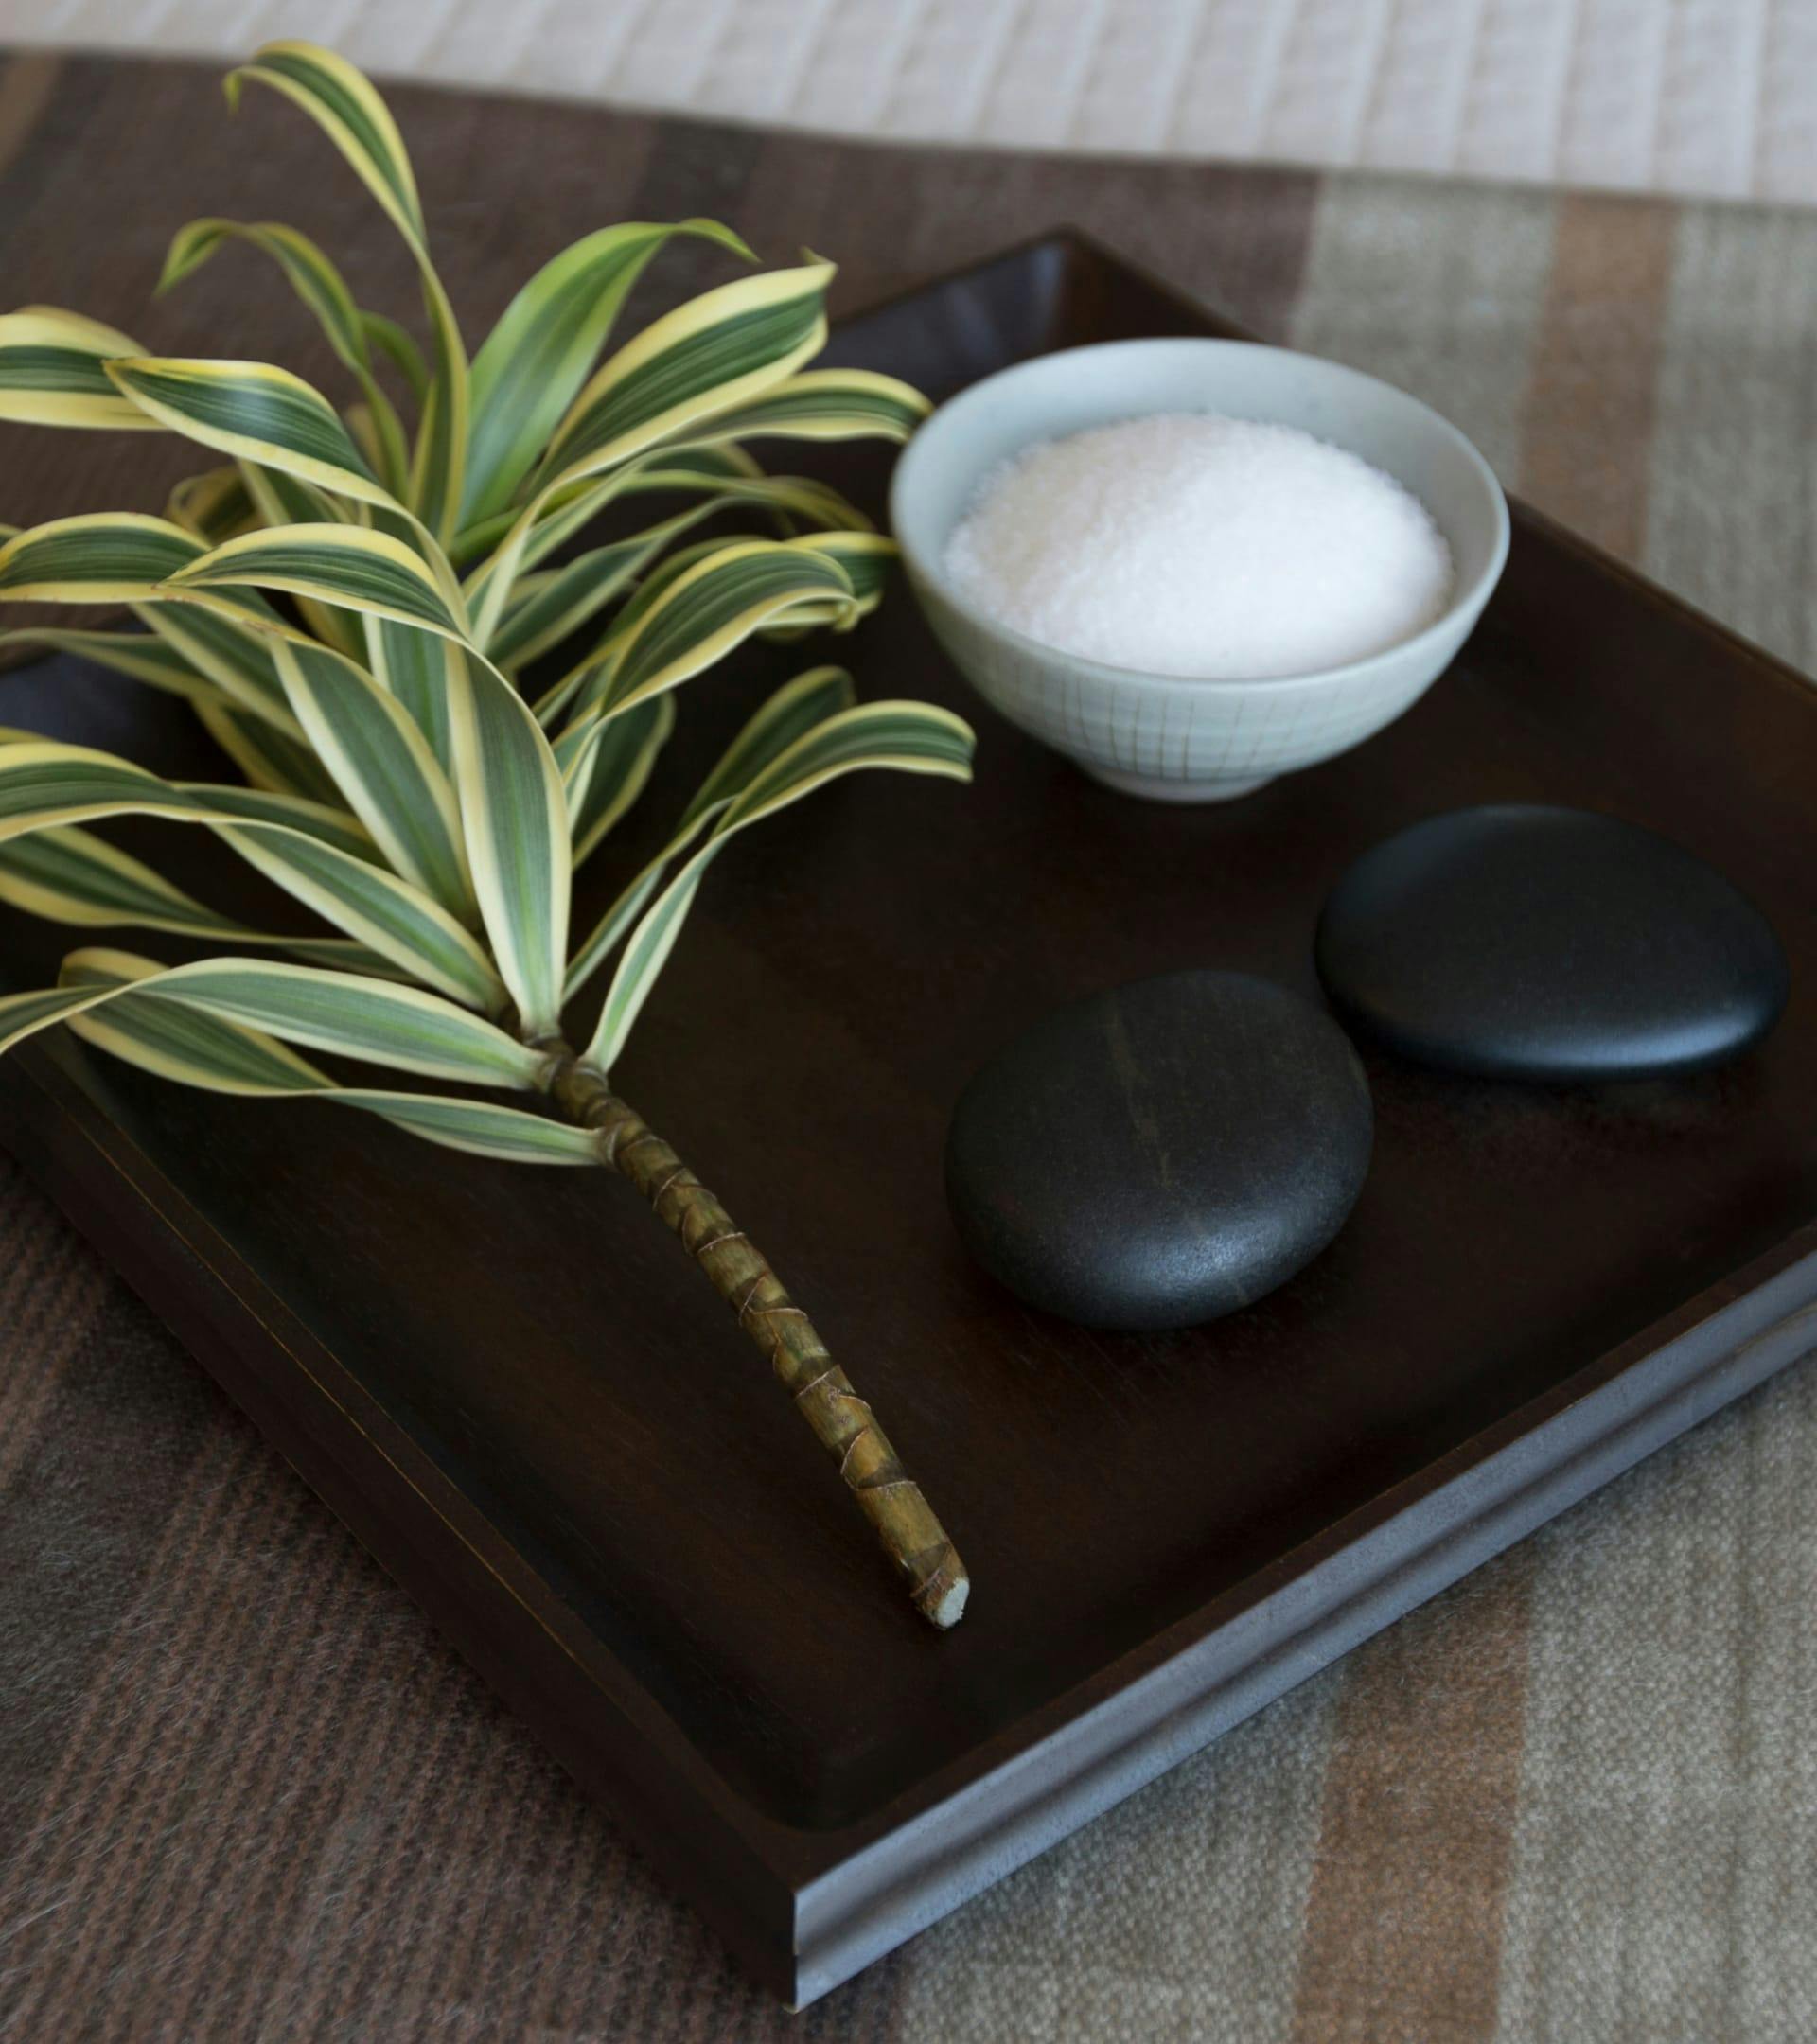 tray with 2 stones, a bowl of salt, and a plant